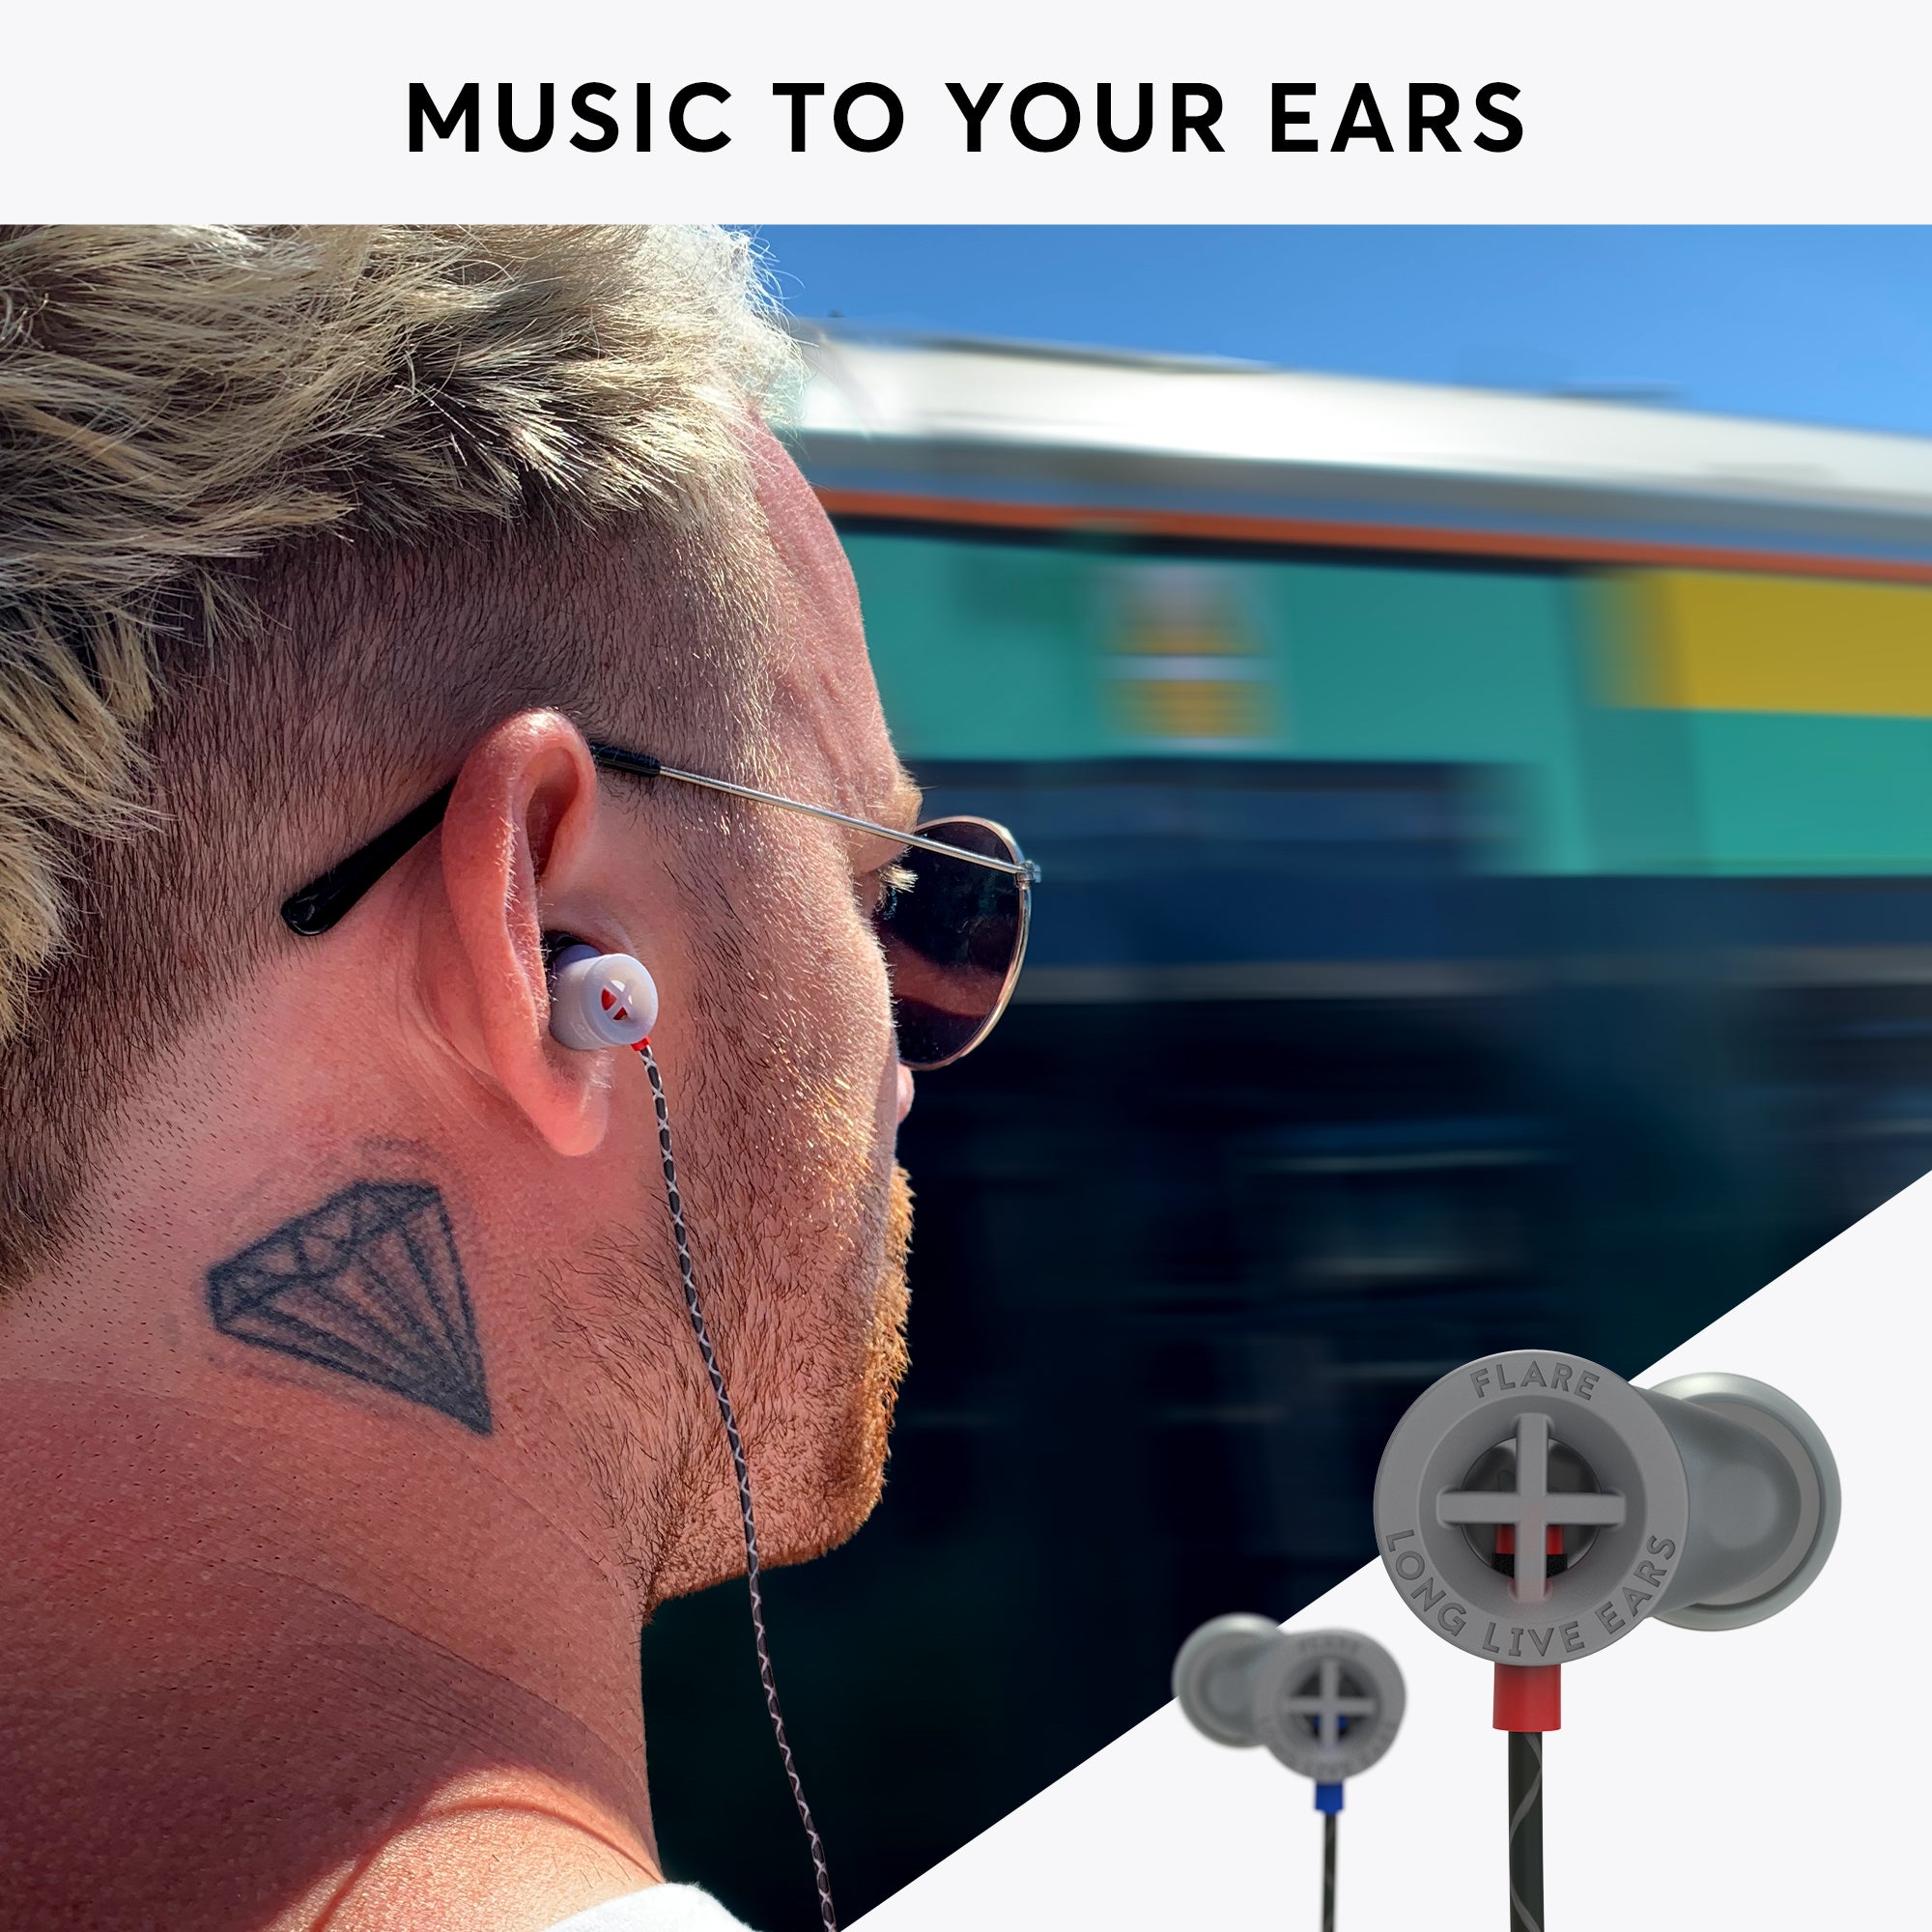 FLARE AUDIO earHD 360 Black - Small in-Ear Device to Increase Sound Quality  for HiFi, Car Stereos, Live Concerts and Under Headphones